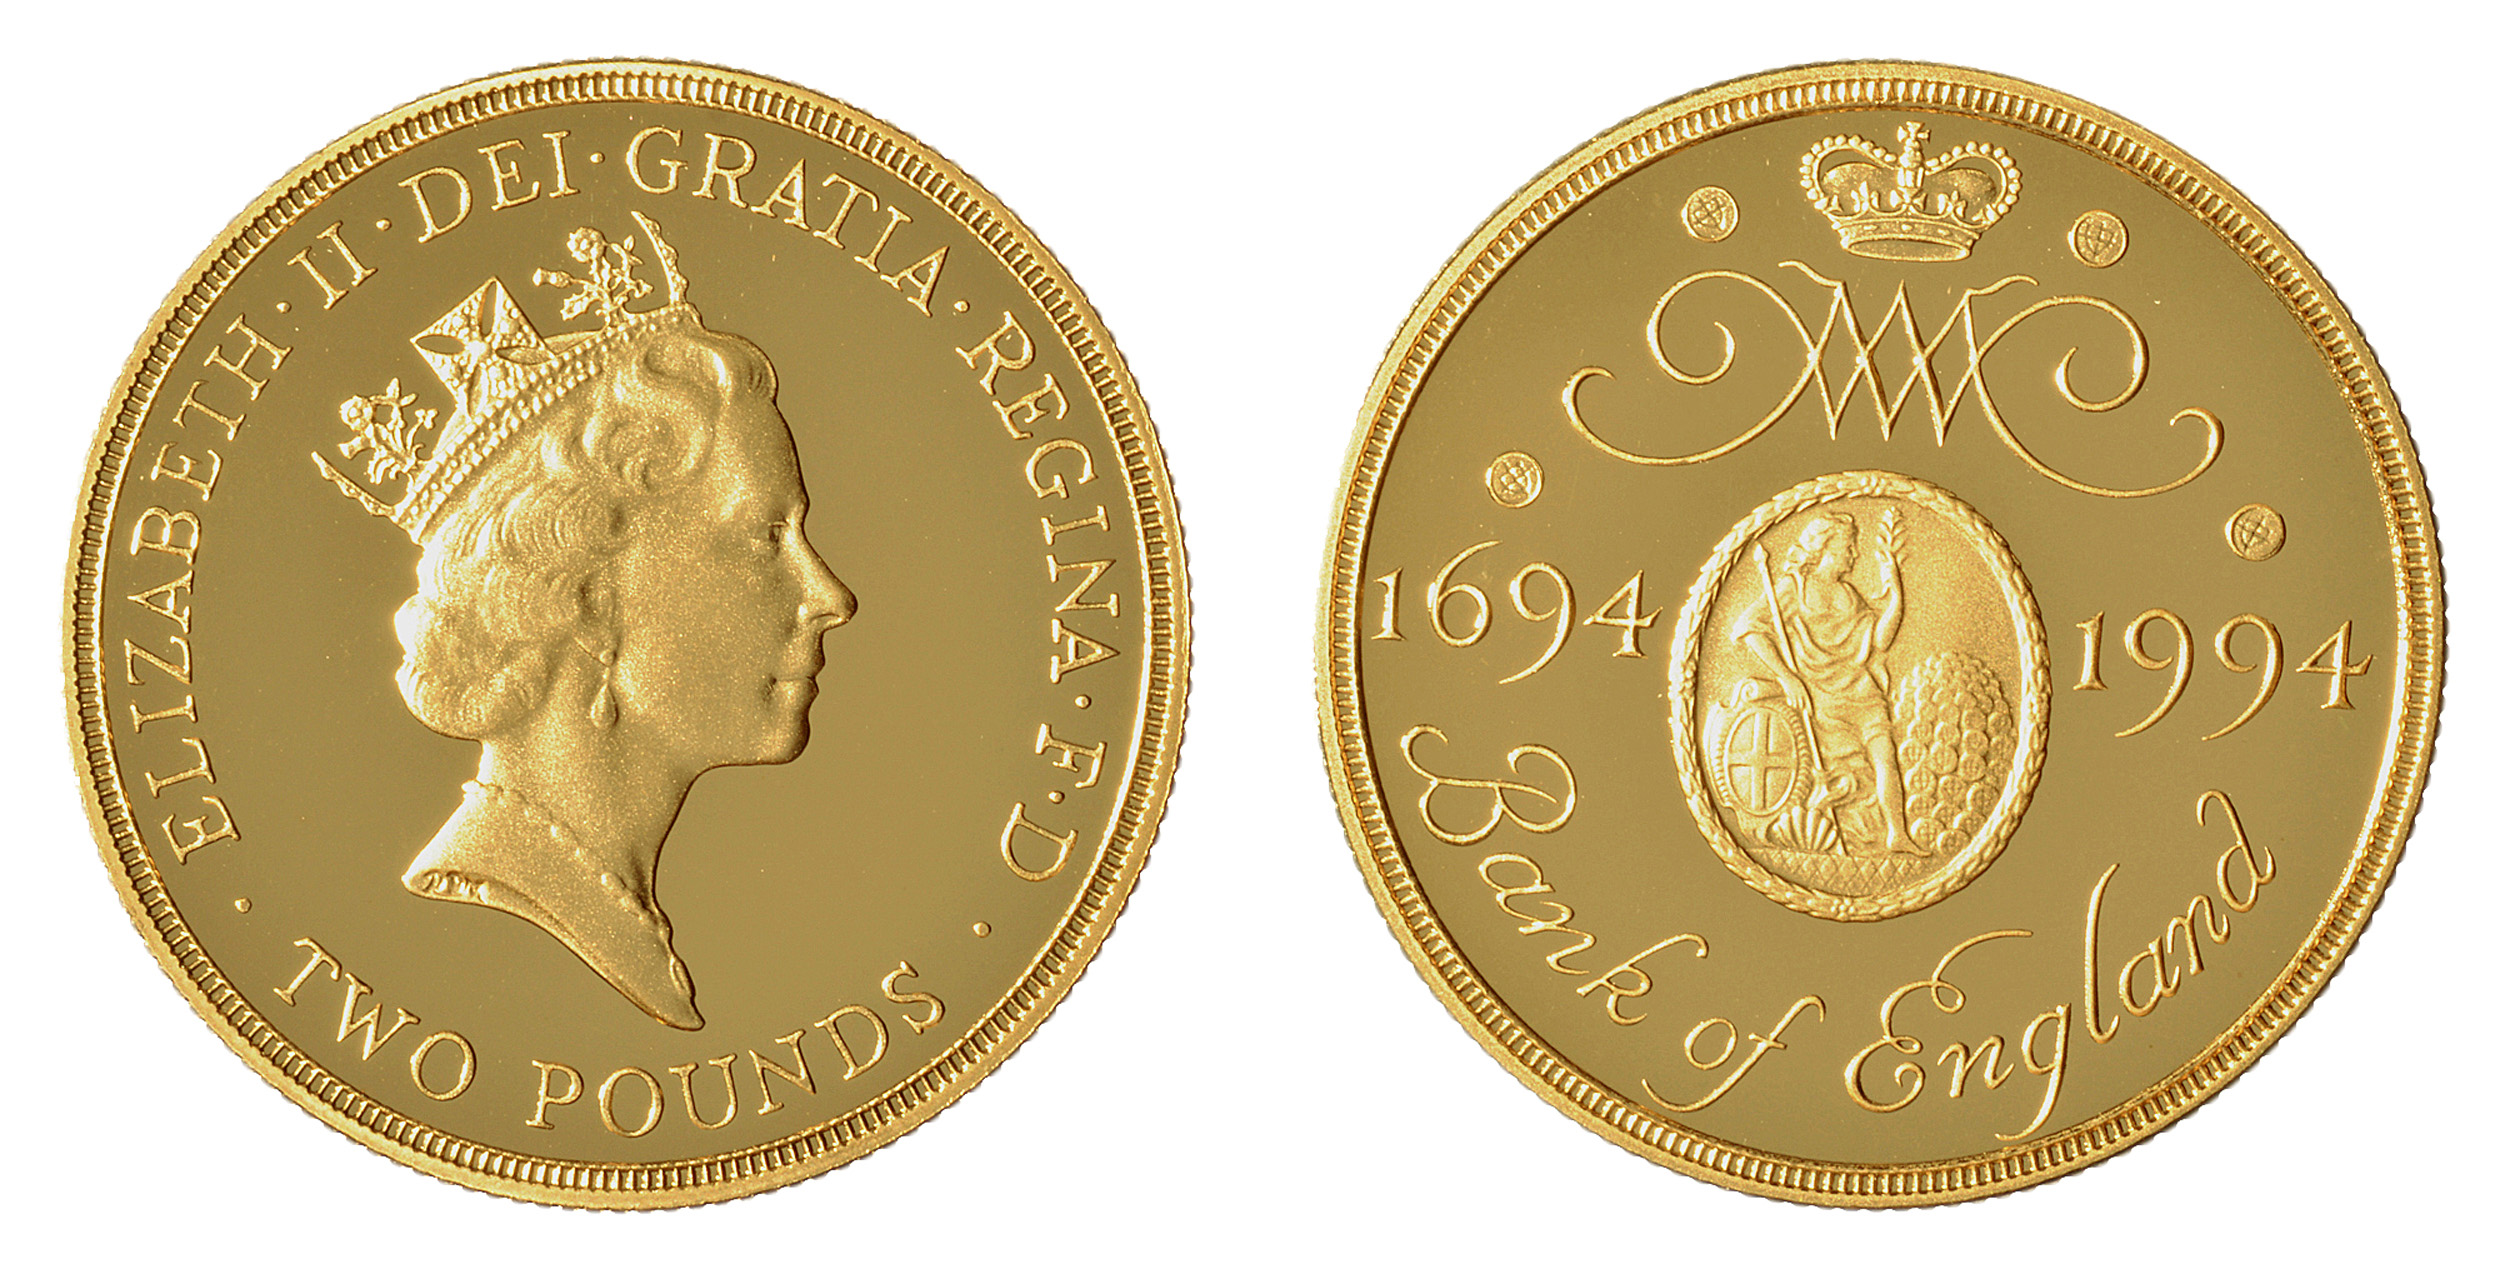 £2 coin to commemorate the Bank of England's 300th birthday